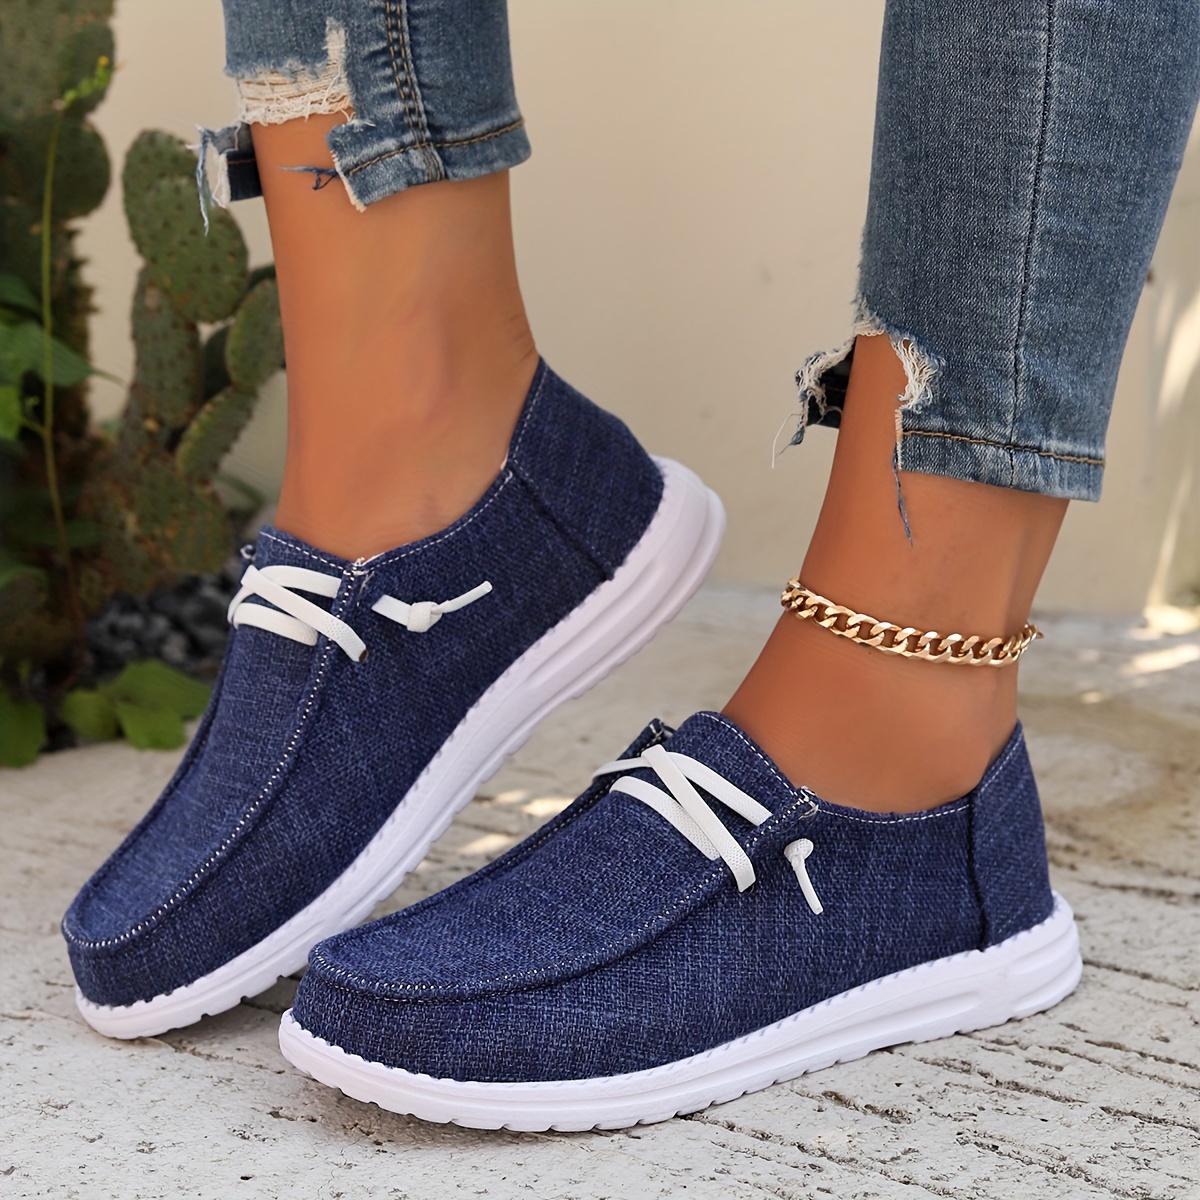 

Women's Fashion Outdoor Skate Shoes, Women's Solid Color Light Casual Elastic Light Flat Canvas Shoes